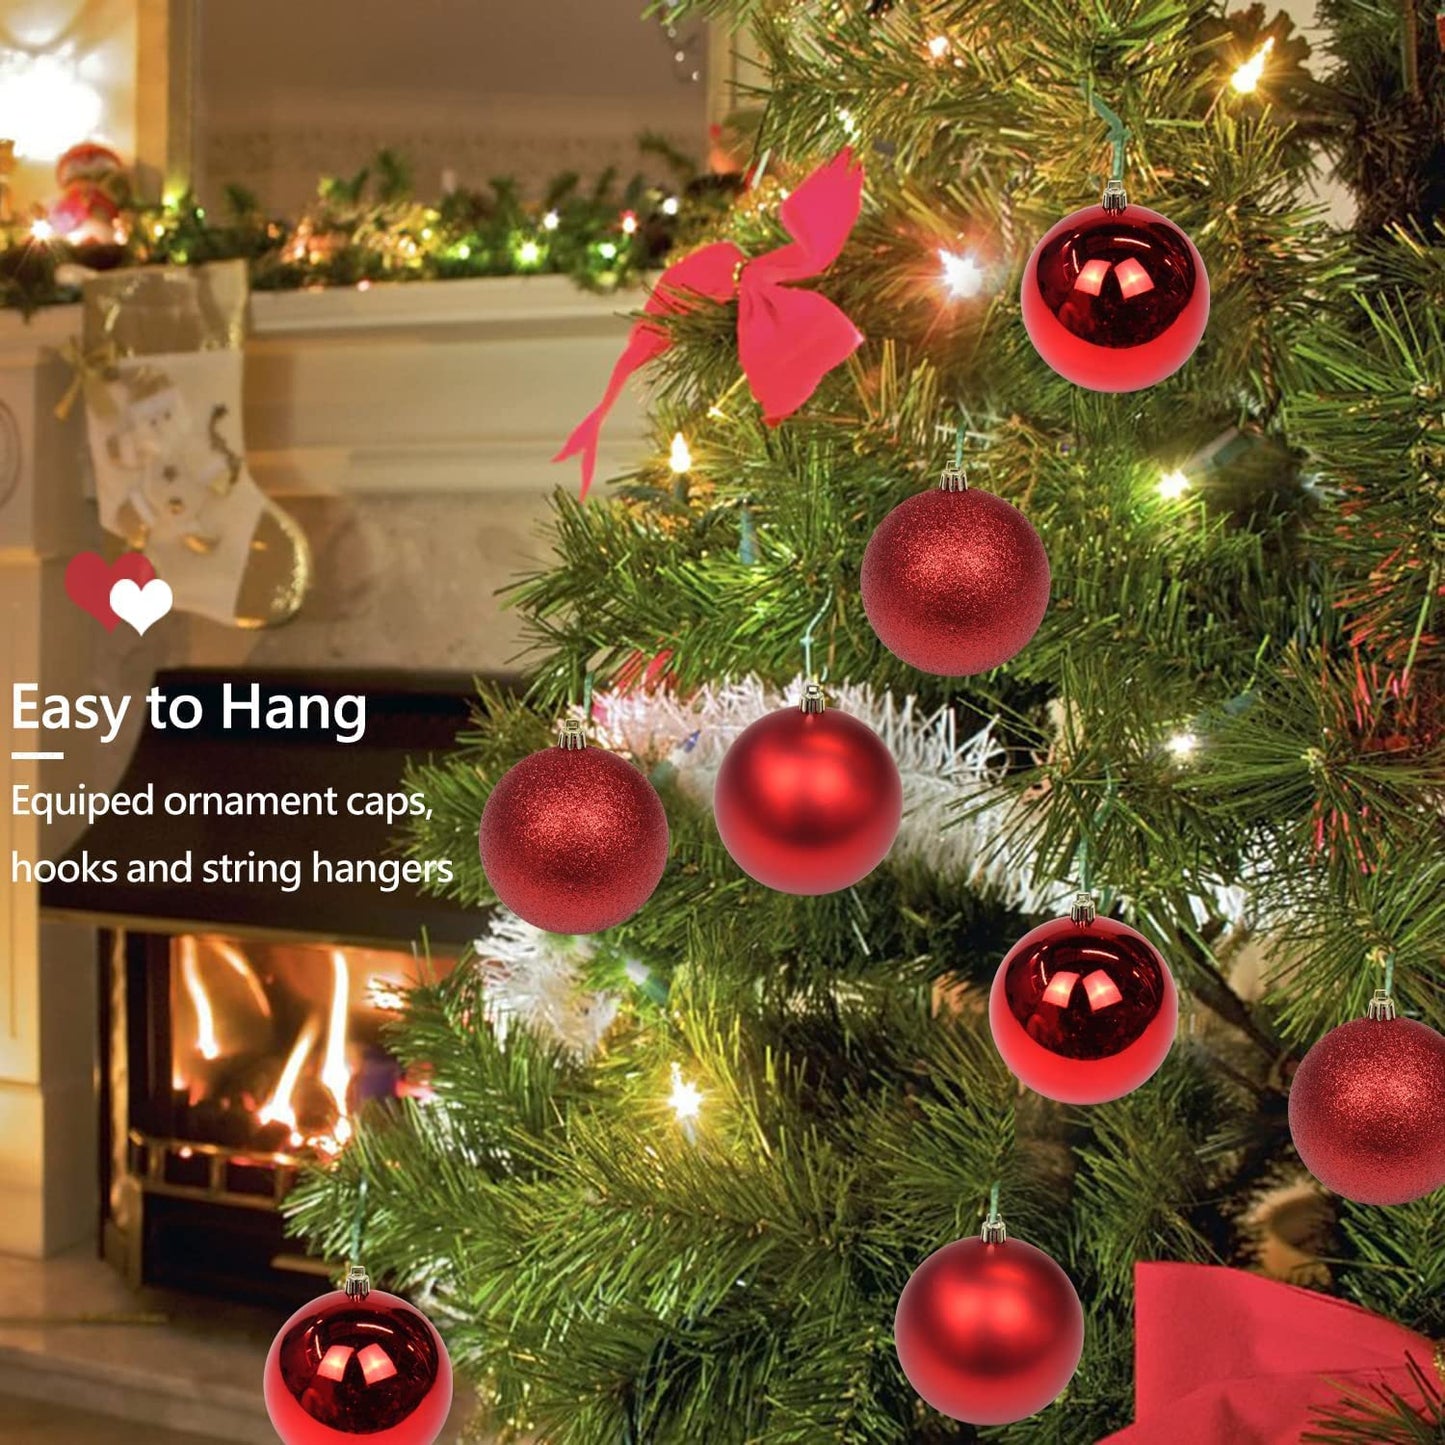 Christmas Red Ball For Hanging - Pack of 6